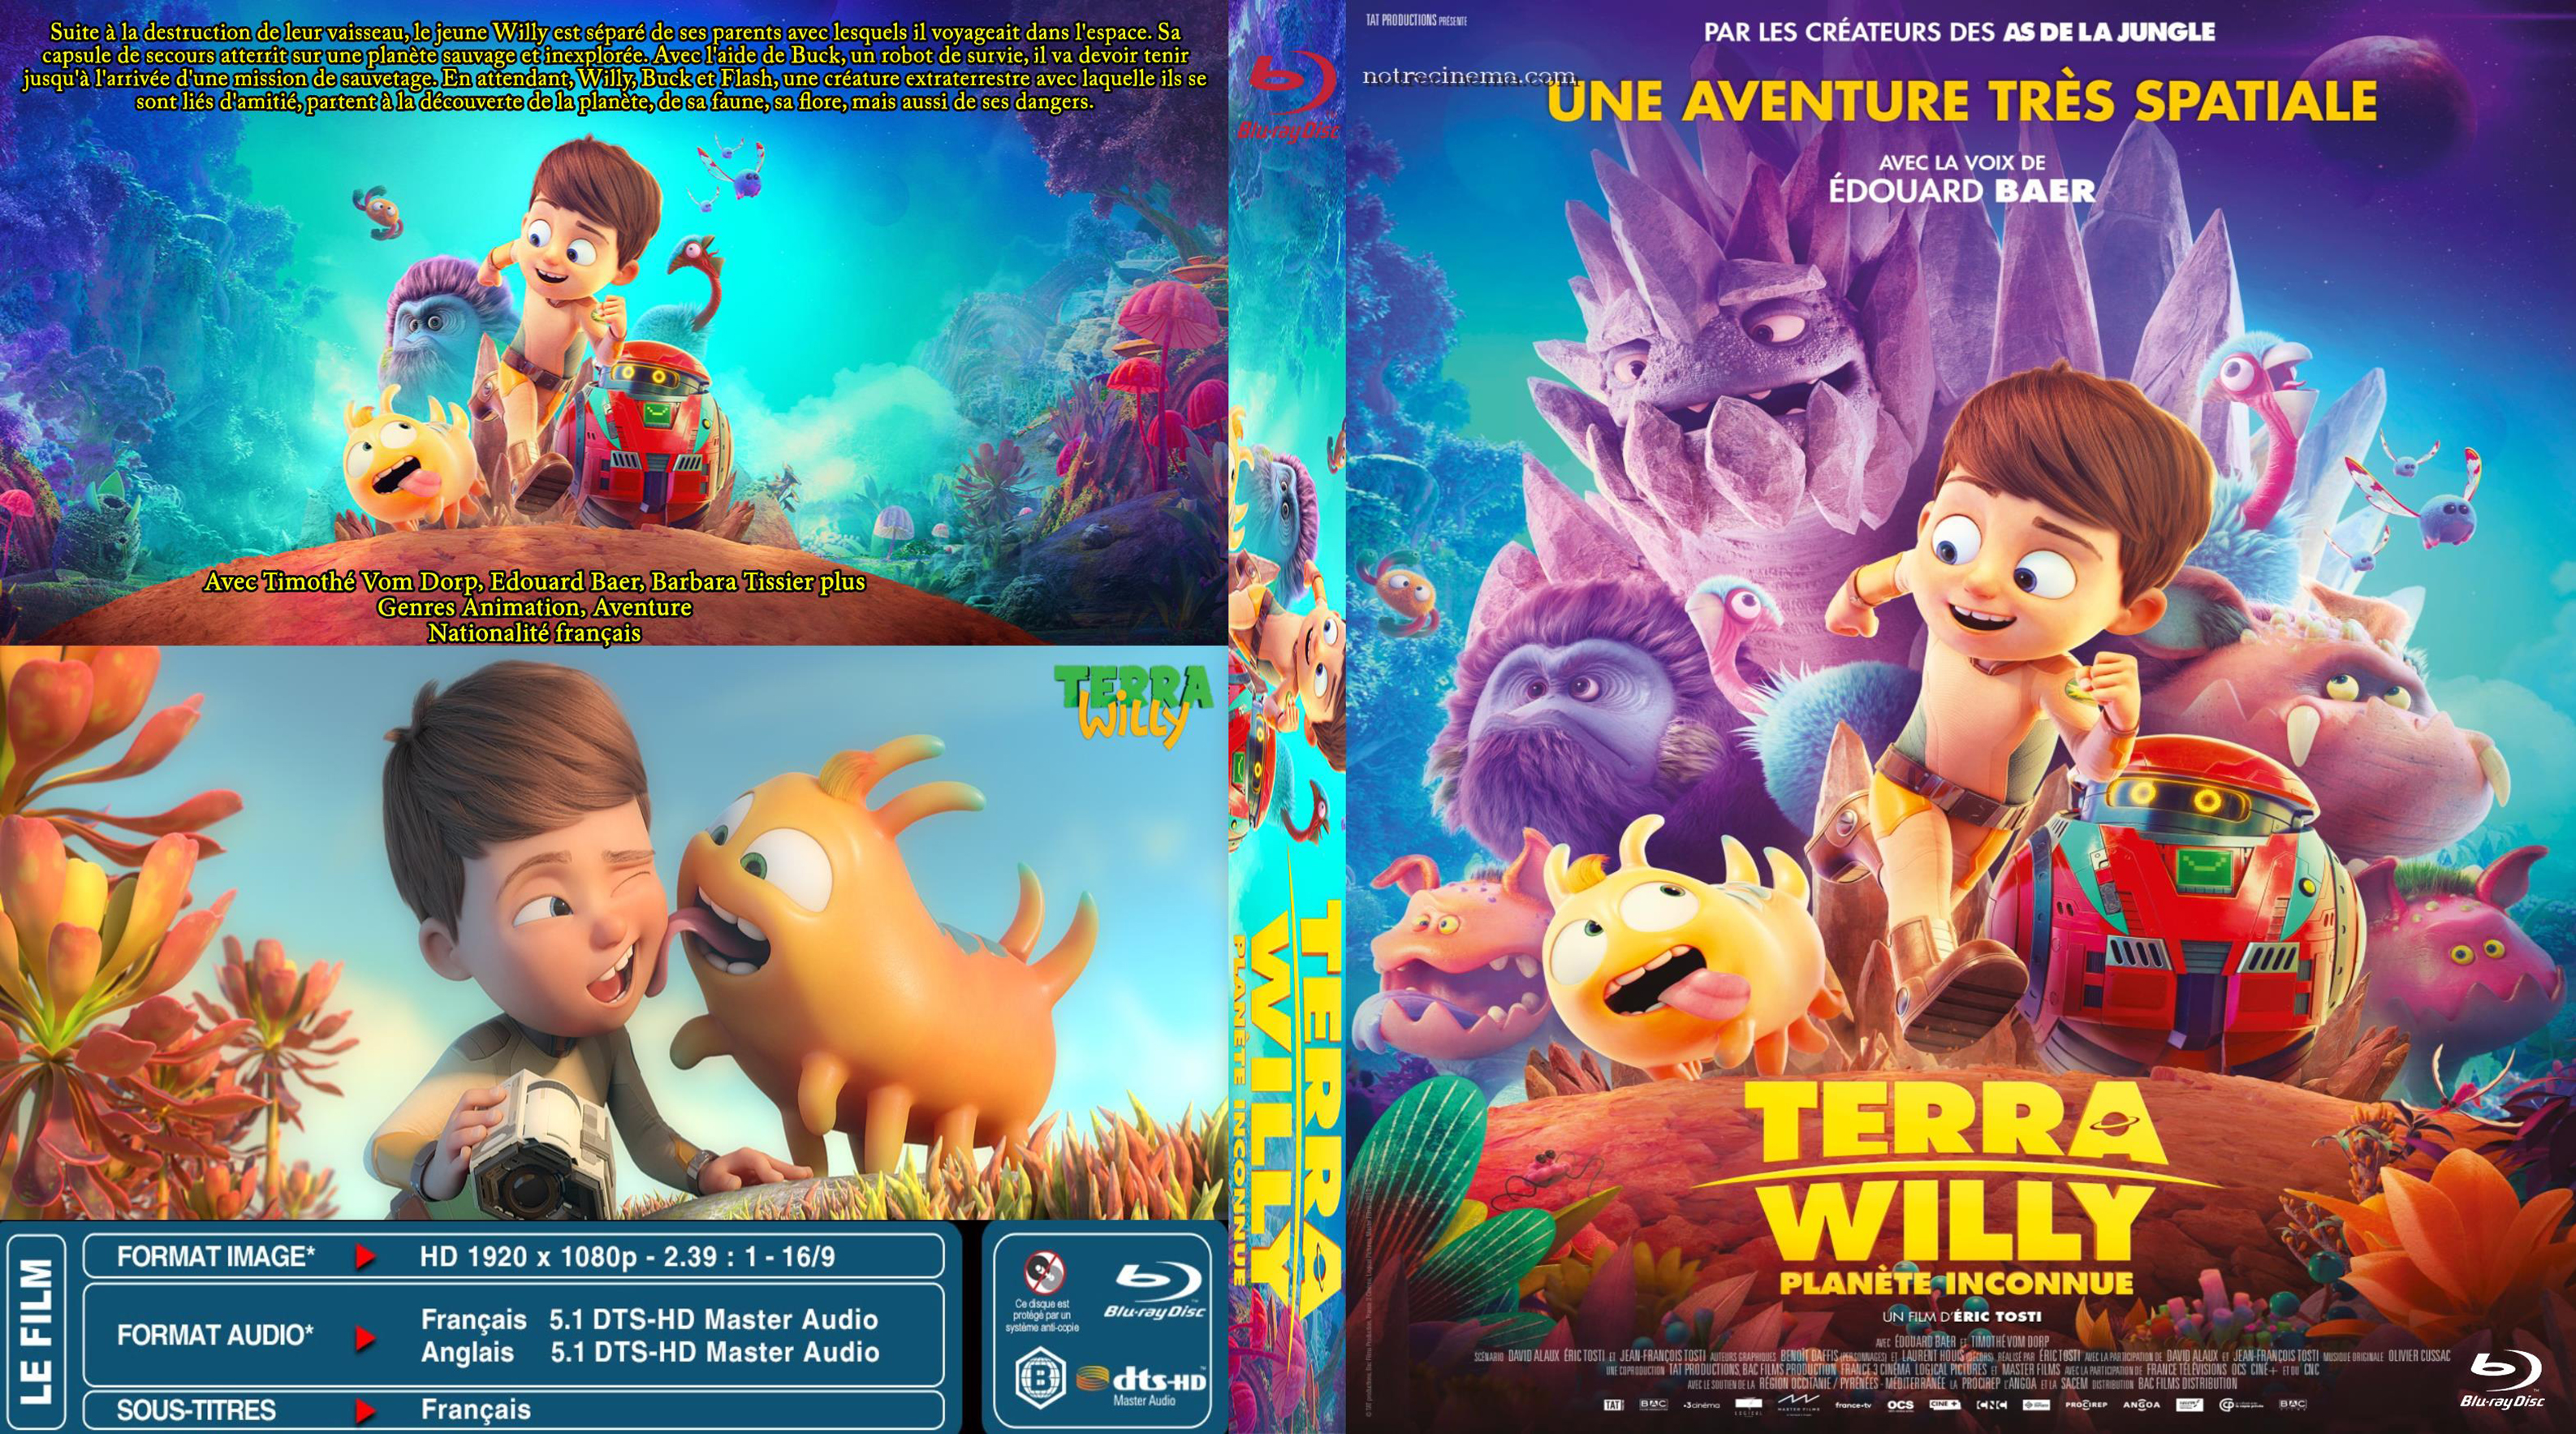 Jaquette DVD Terra willy plante inconnue custom (BLU-RAY)